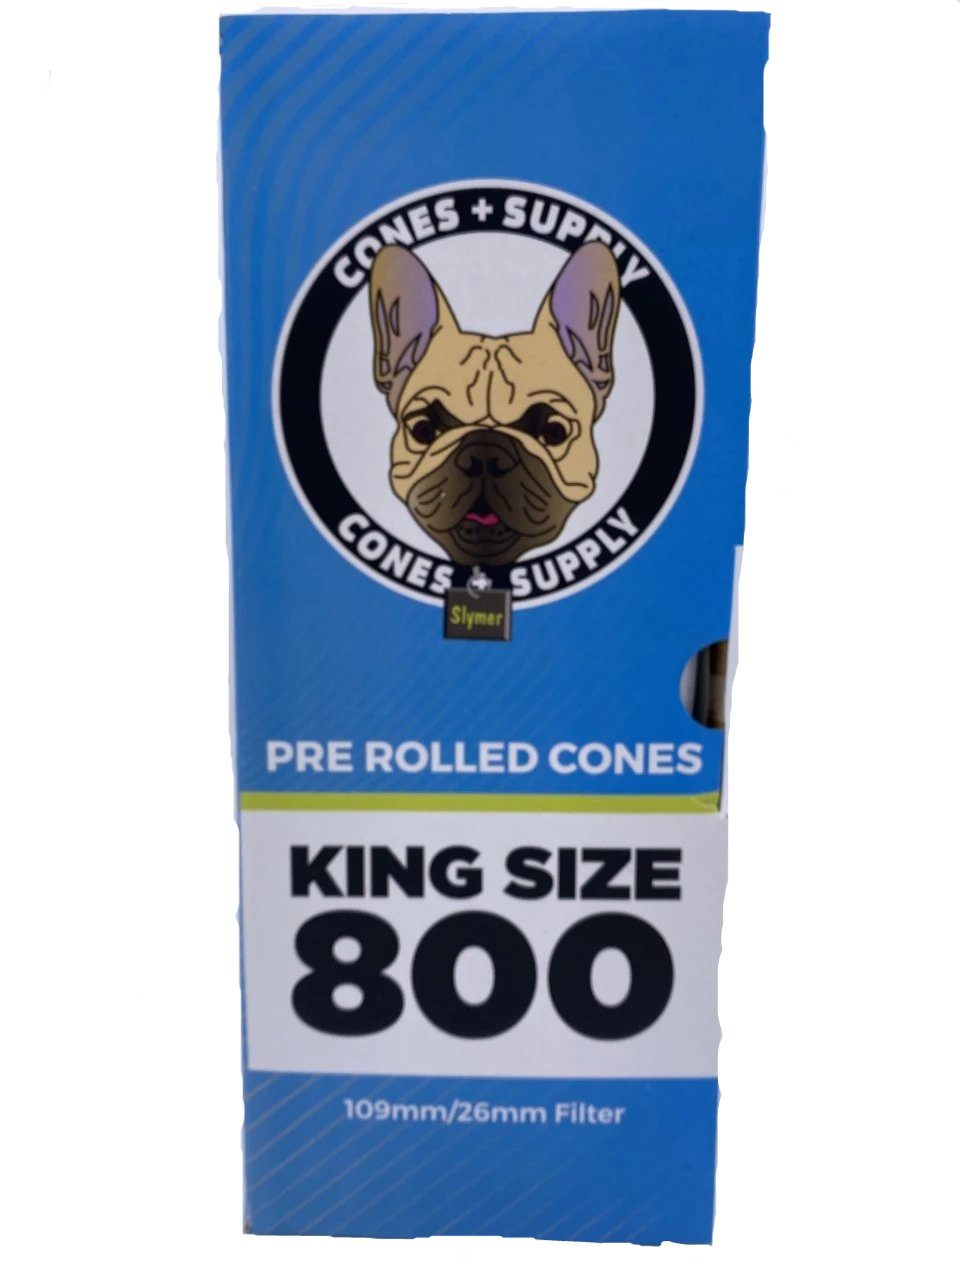 Cones + Supply Classic White King Size Cones 109mm 800 Count Flower Power Packages 